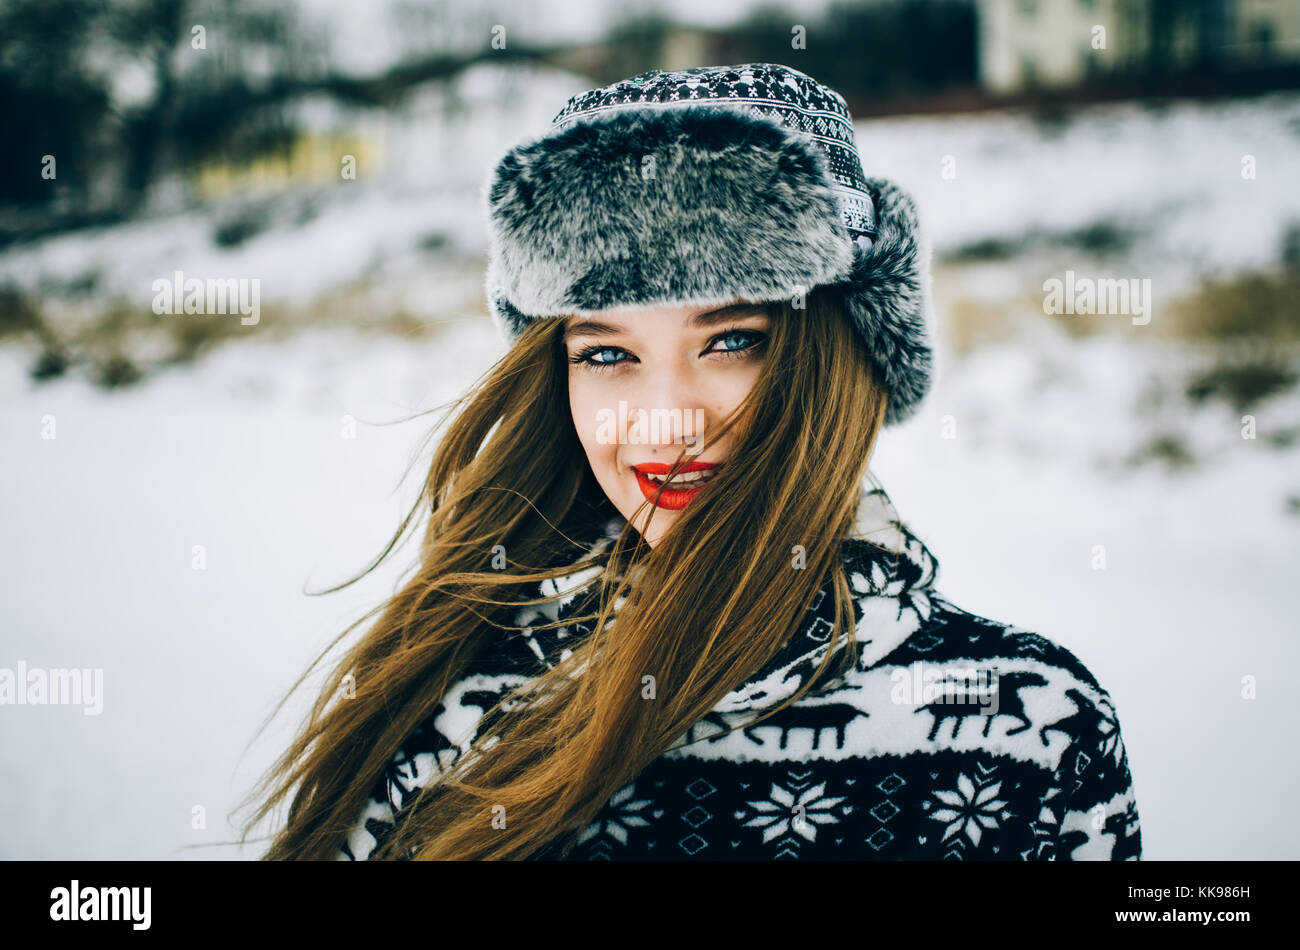 Portrait of handsome young woman with blue eyes looking camera and wearing warm hat in winter. Stock Photo